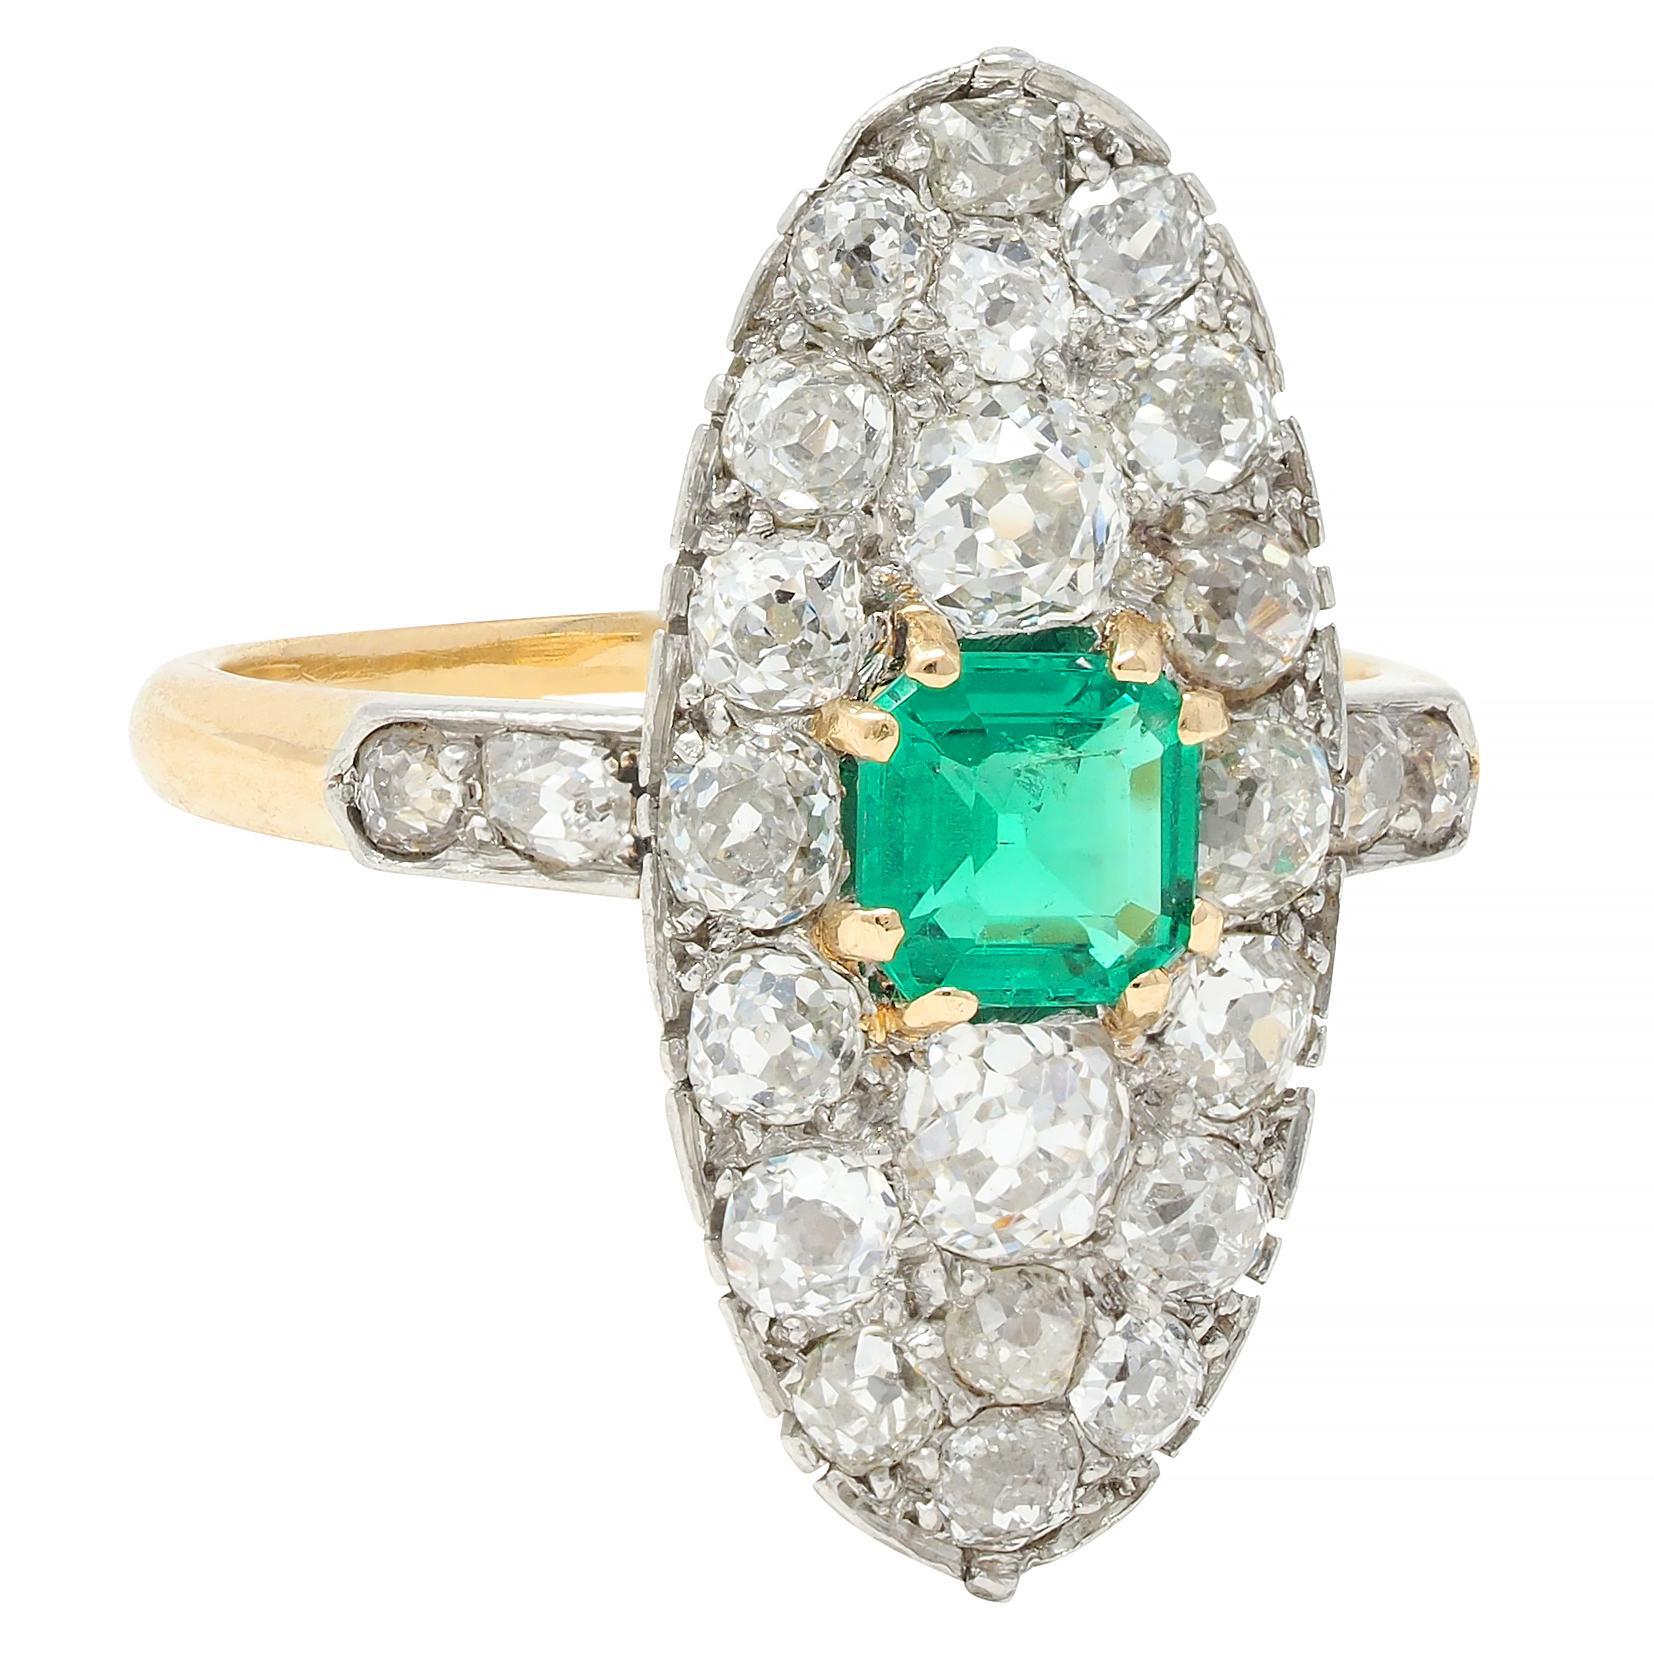 Centering an emerald cut emerald weighing approximately 0.45 carat - transparent medium green
Set with yellow gold split prongs with a recessed navette shaped platinum-topped surround
Prong set throughout form and shoulders with old mine cut